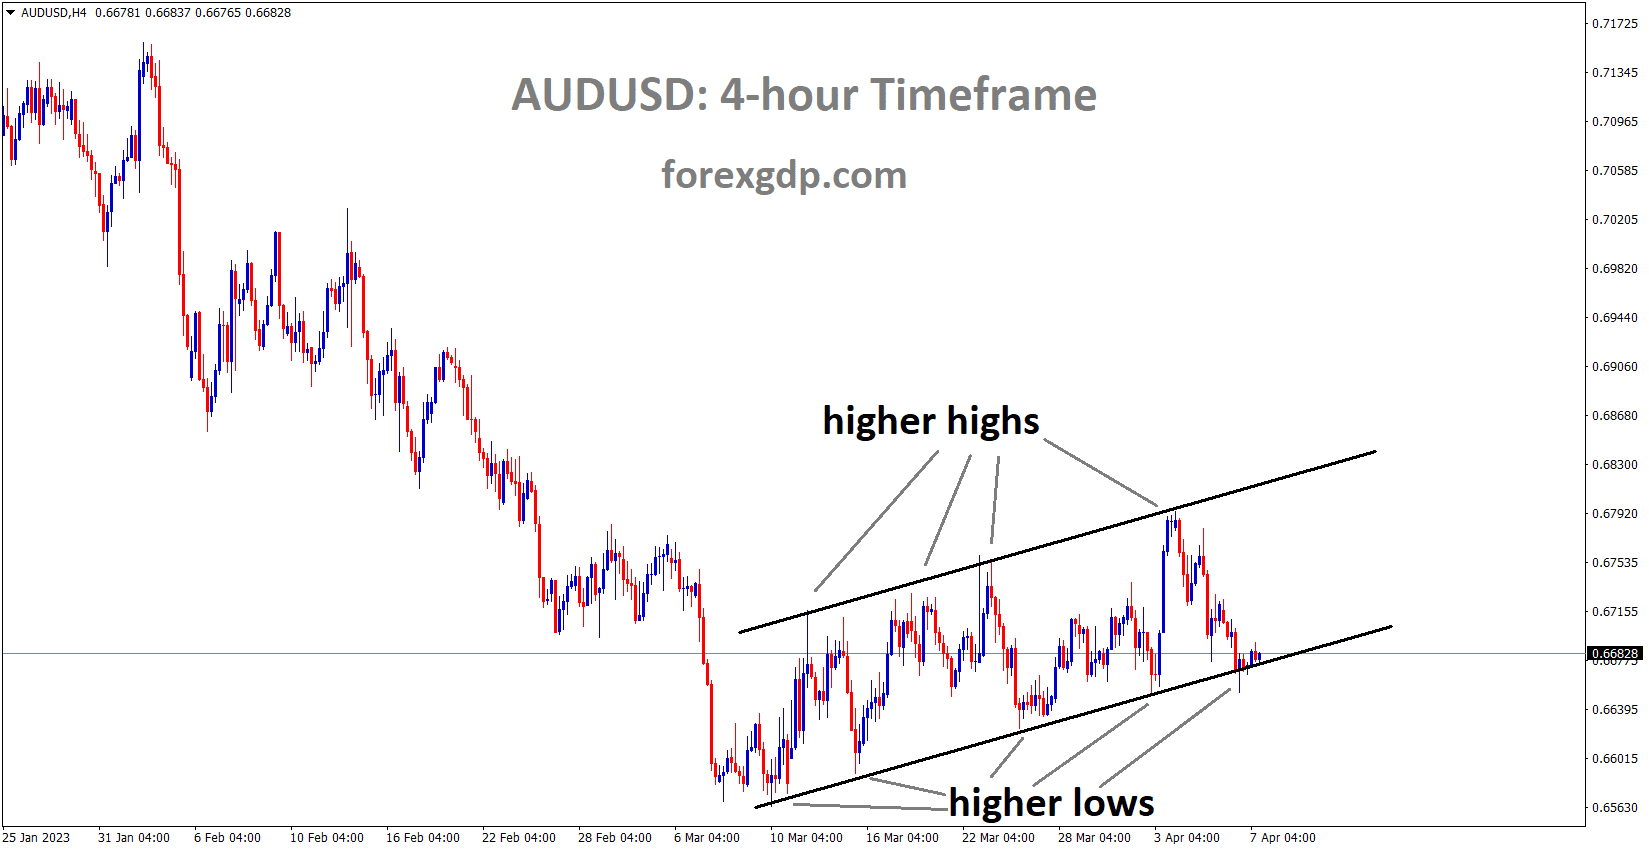 AUDUSD is moving in an Ascending channel and the market has rebounded from the higher low area of the channel